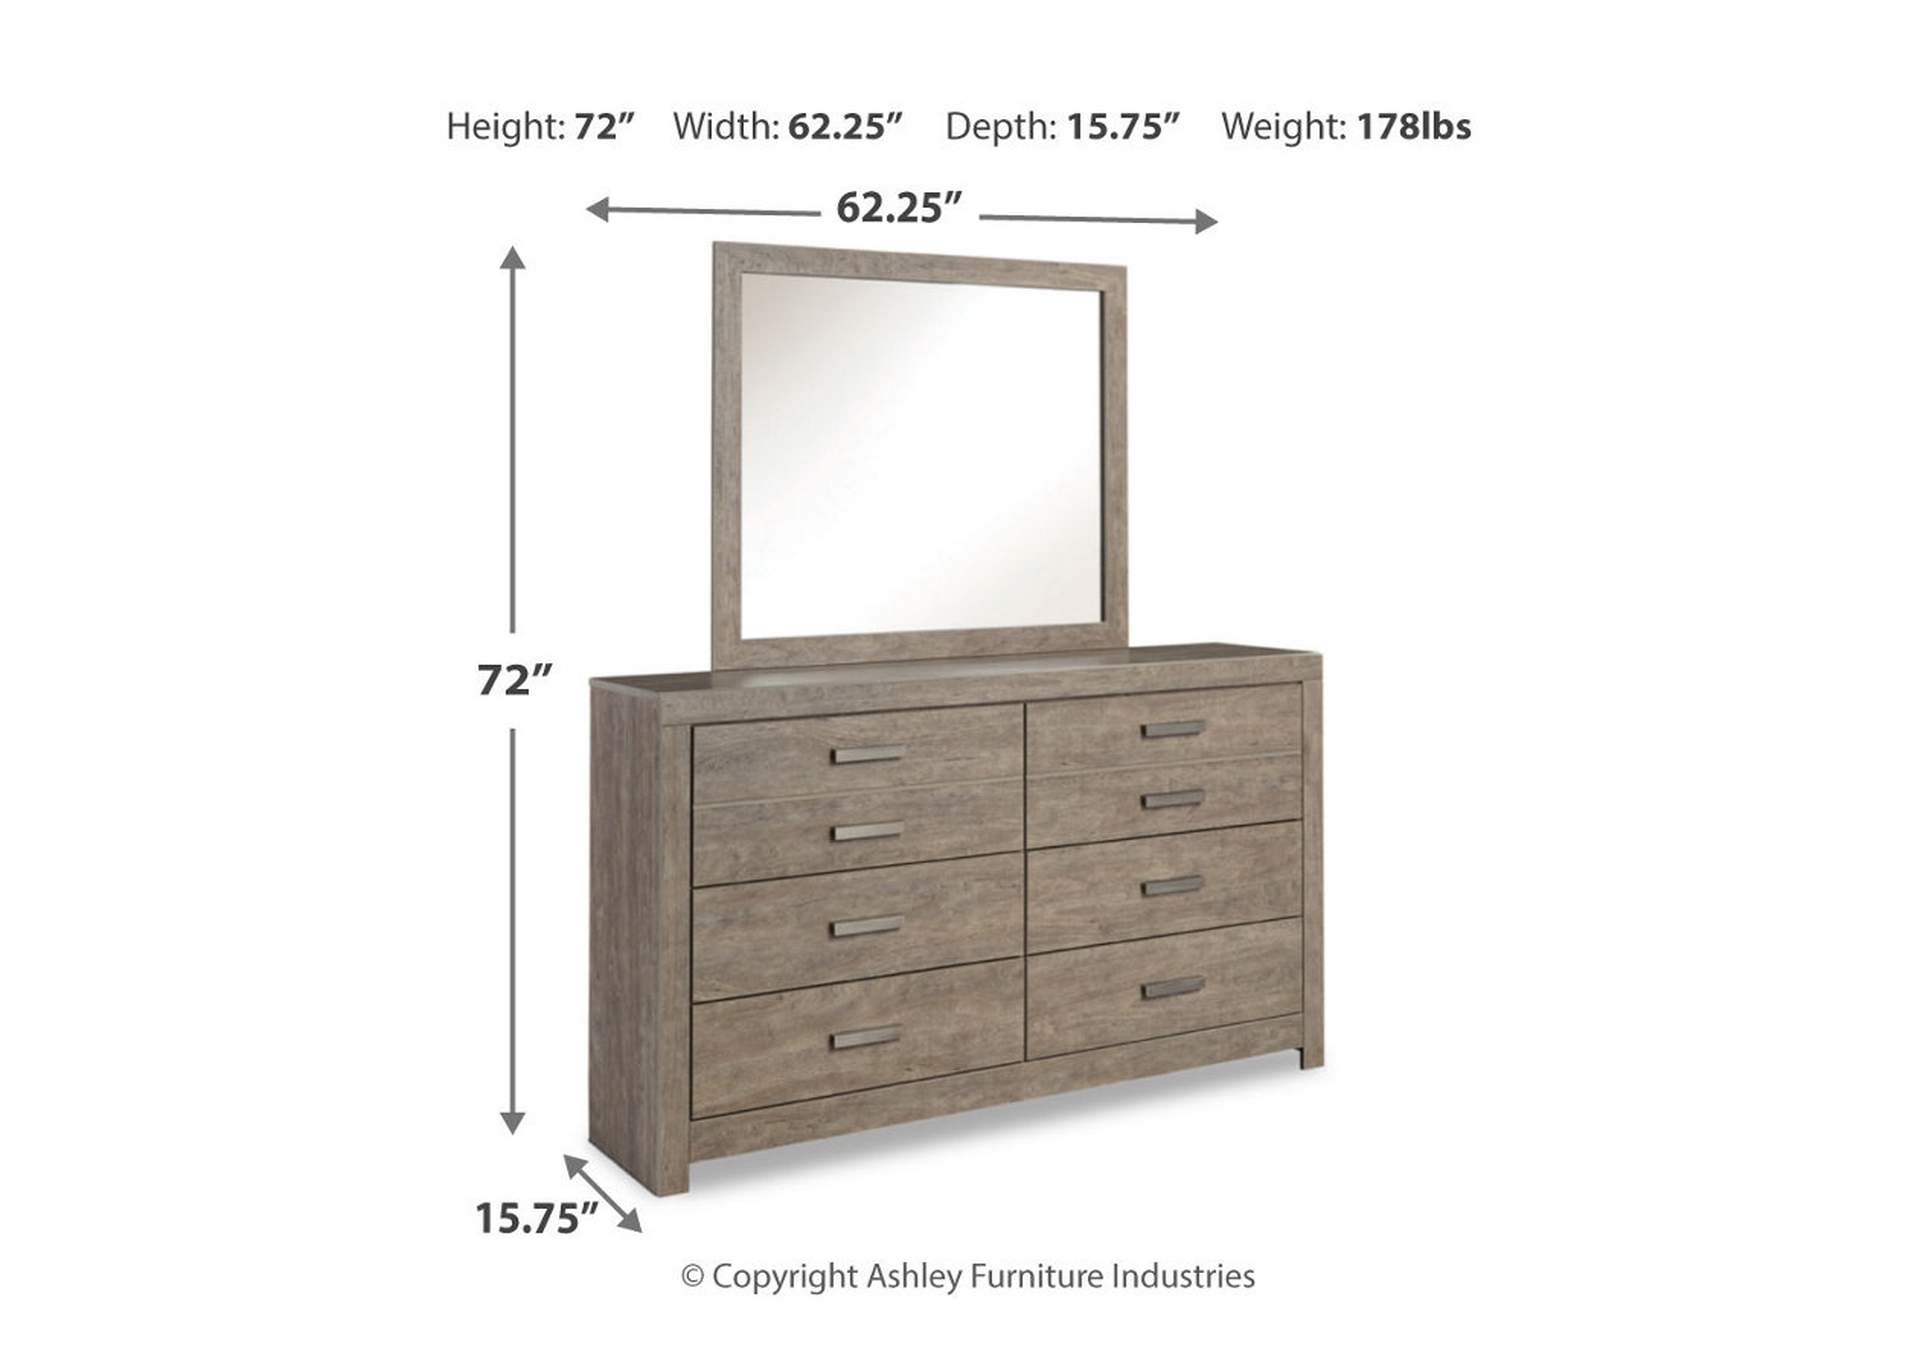 Culverbach Full Panel Bed with Mirrored Dresser,Signature Design By Ashley